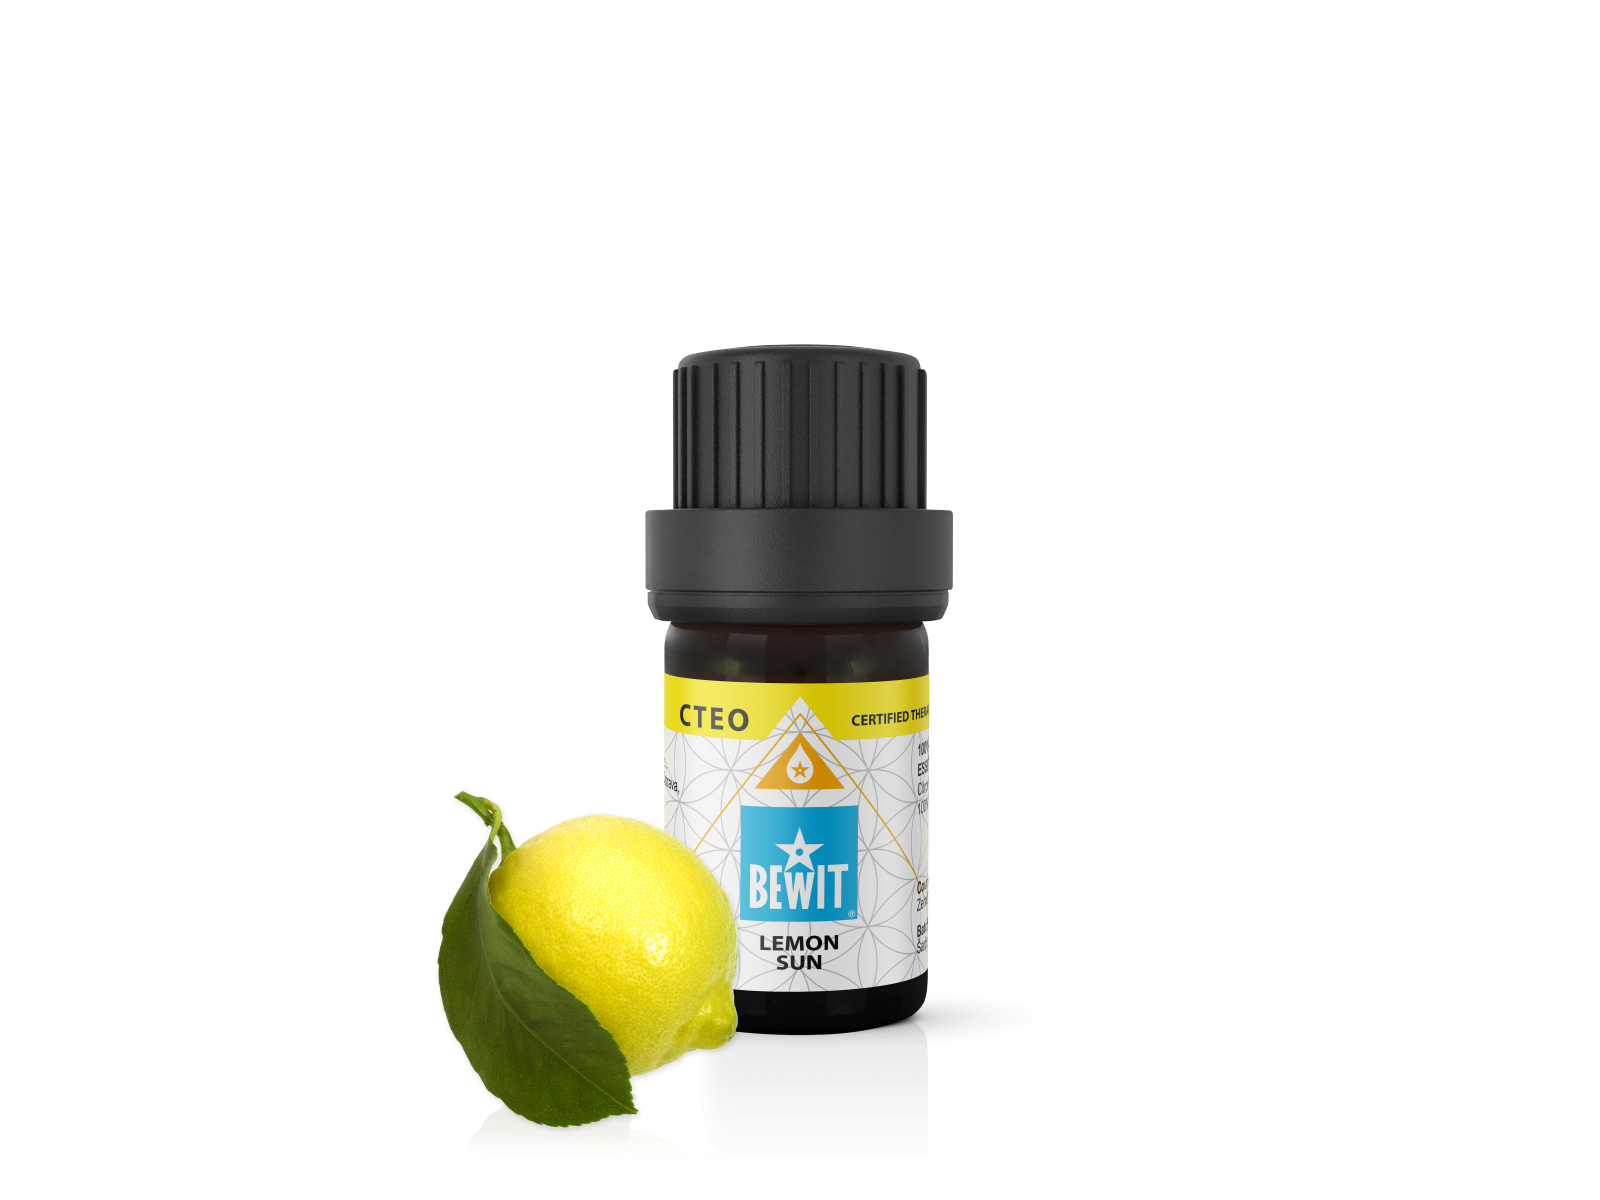 BEWIT Lemon SUN - 100% pure and natural CTEO® essential oil - 2